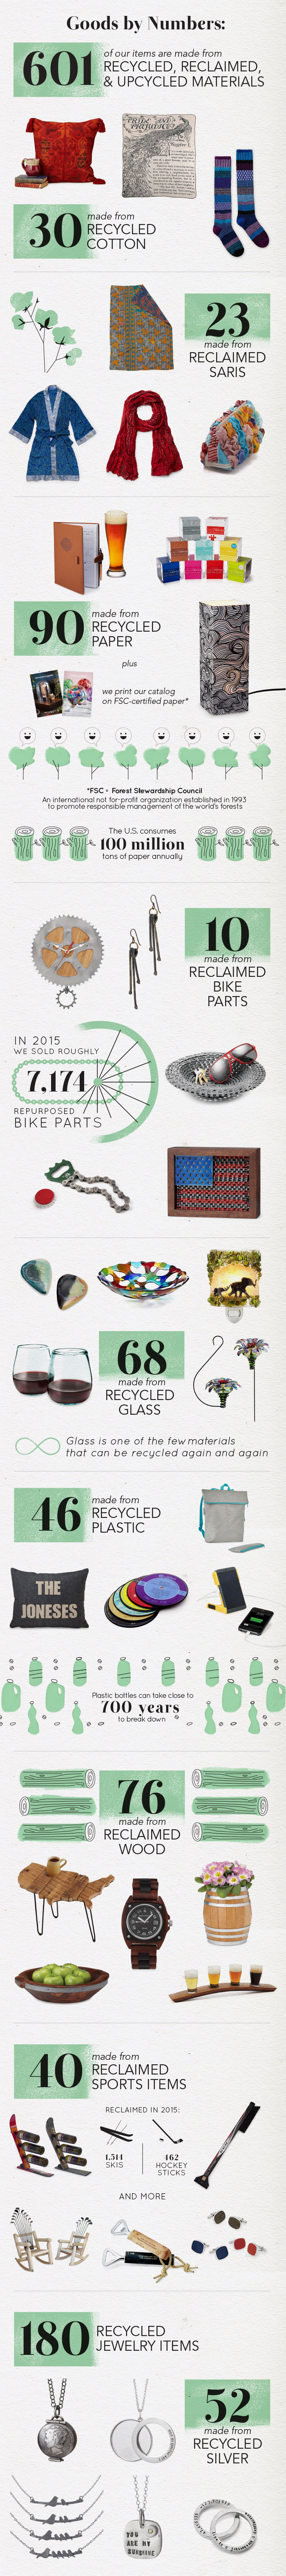 021616_recycled-items-infographic_blog